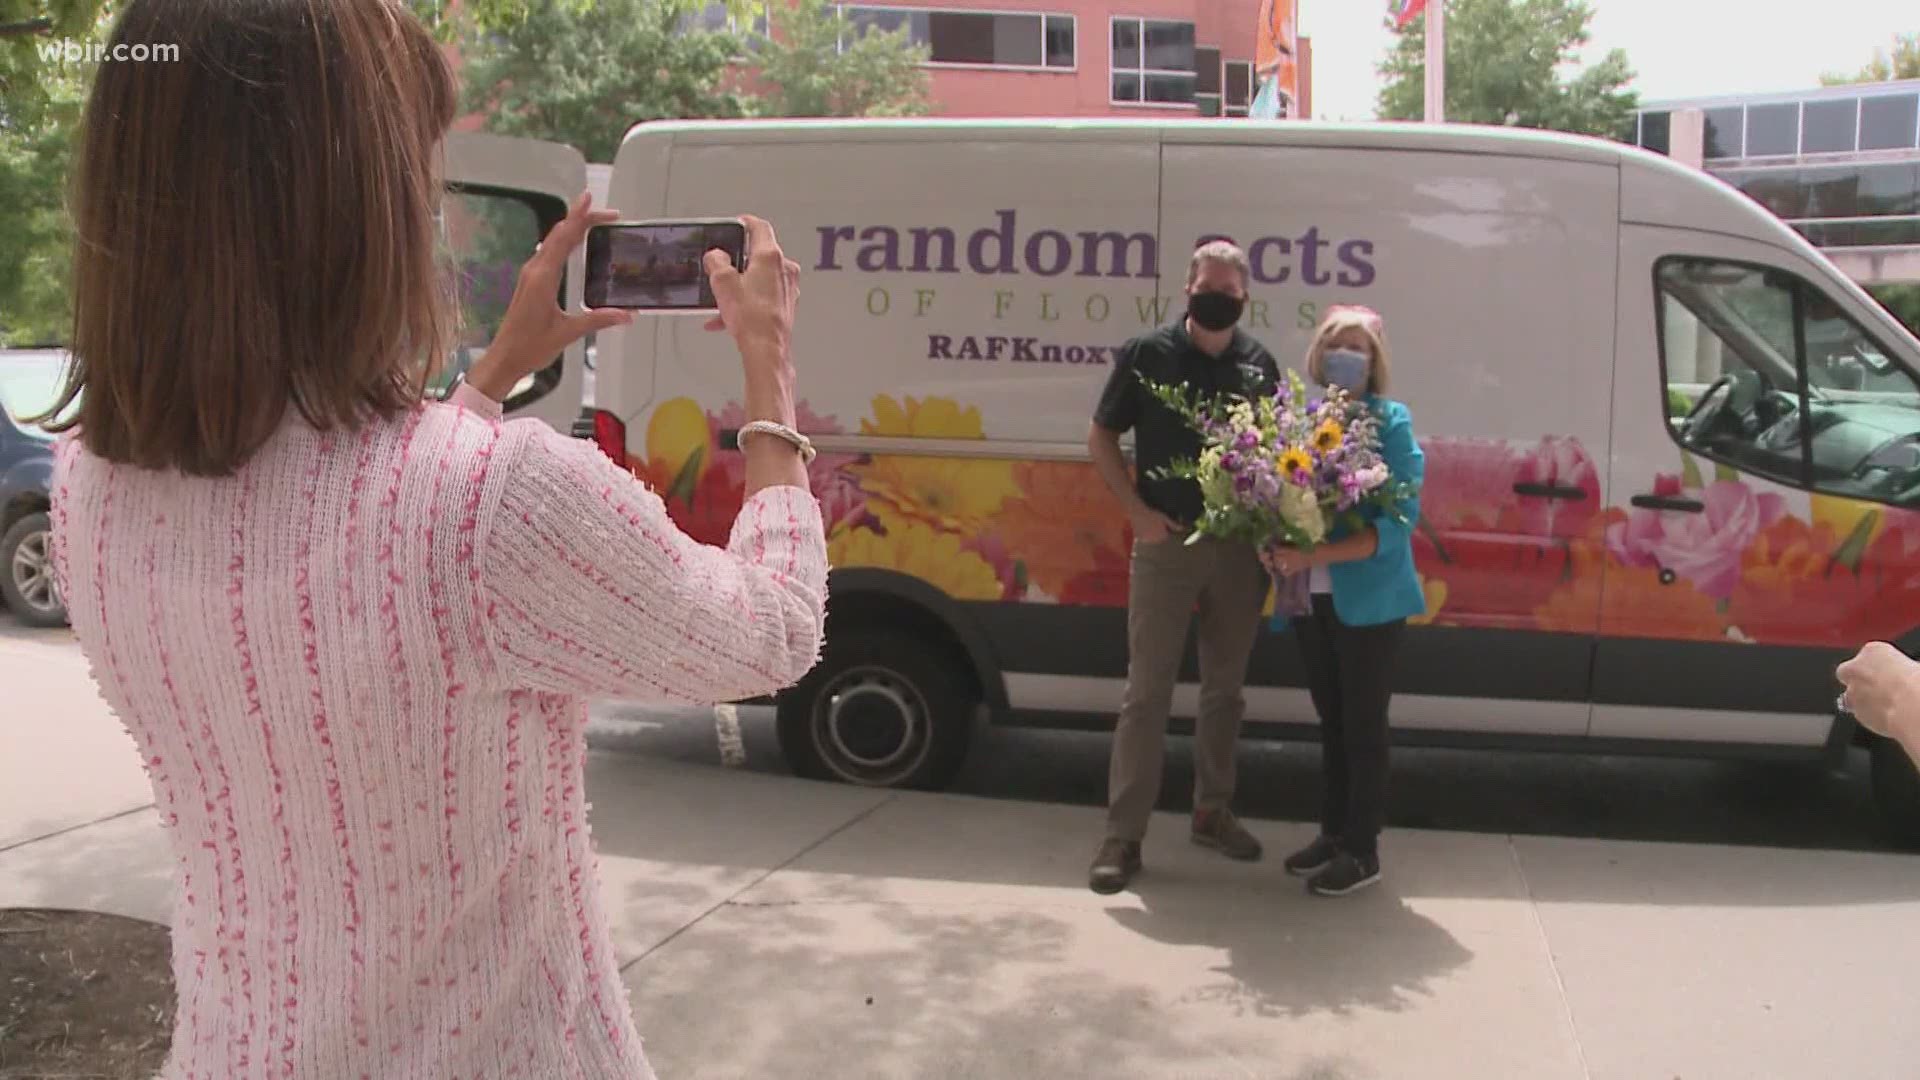 Random Acts of Flowers marks 500,000 deliveries while thanking co-founder Larsen Jay who is making a professional exit. Their work will continue. Aug. 27, 2020-4pm.